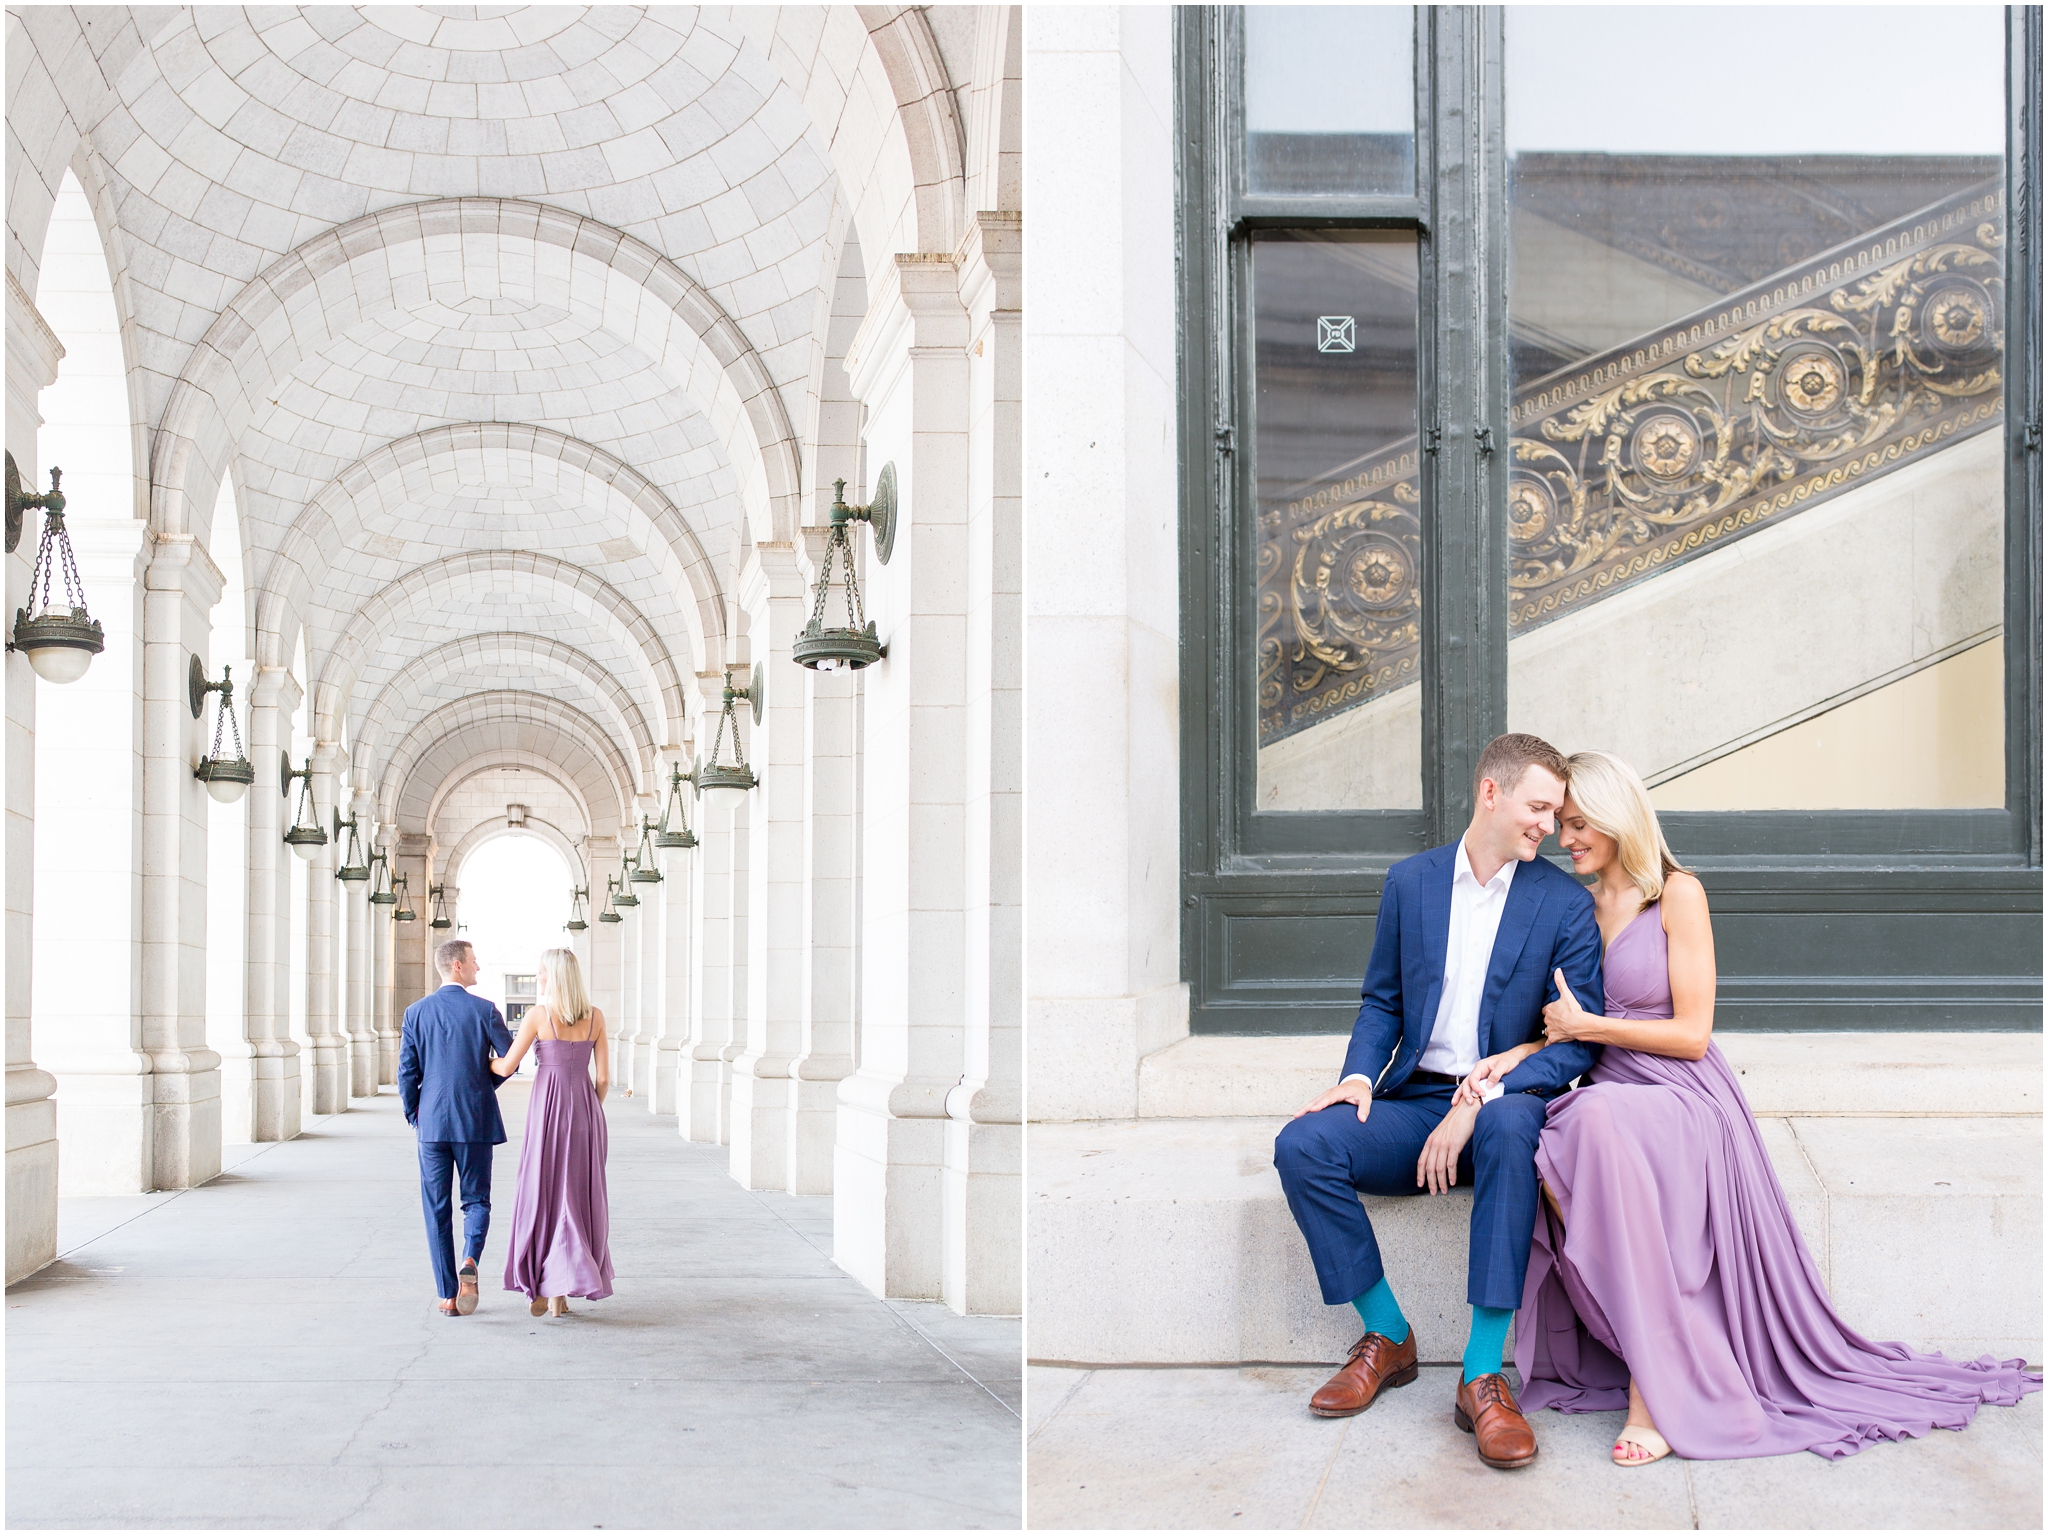 Union Station engagement session at Union Station wedding venue captured by Taylor Rose Photography